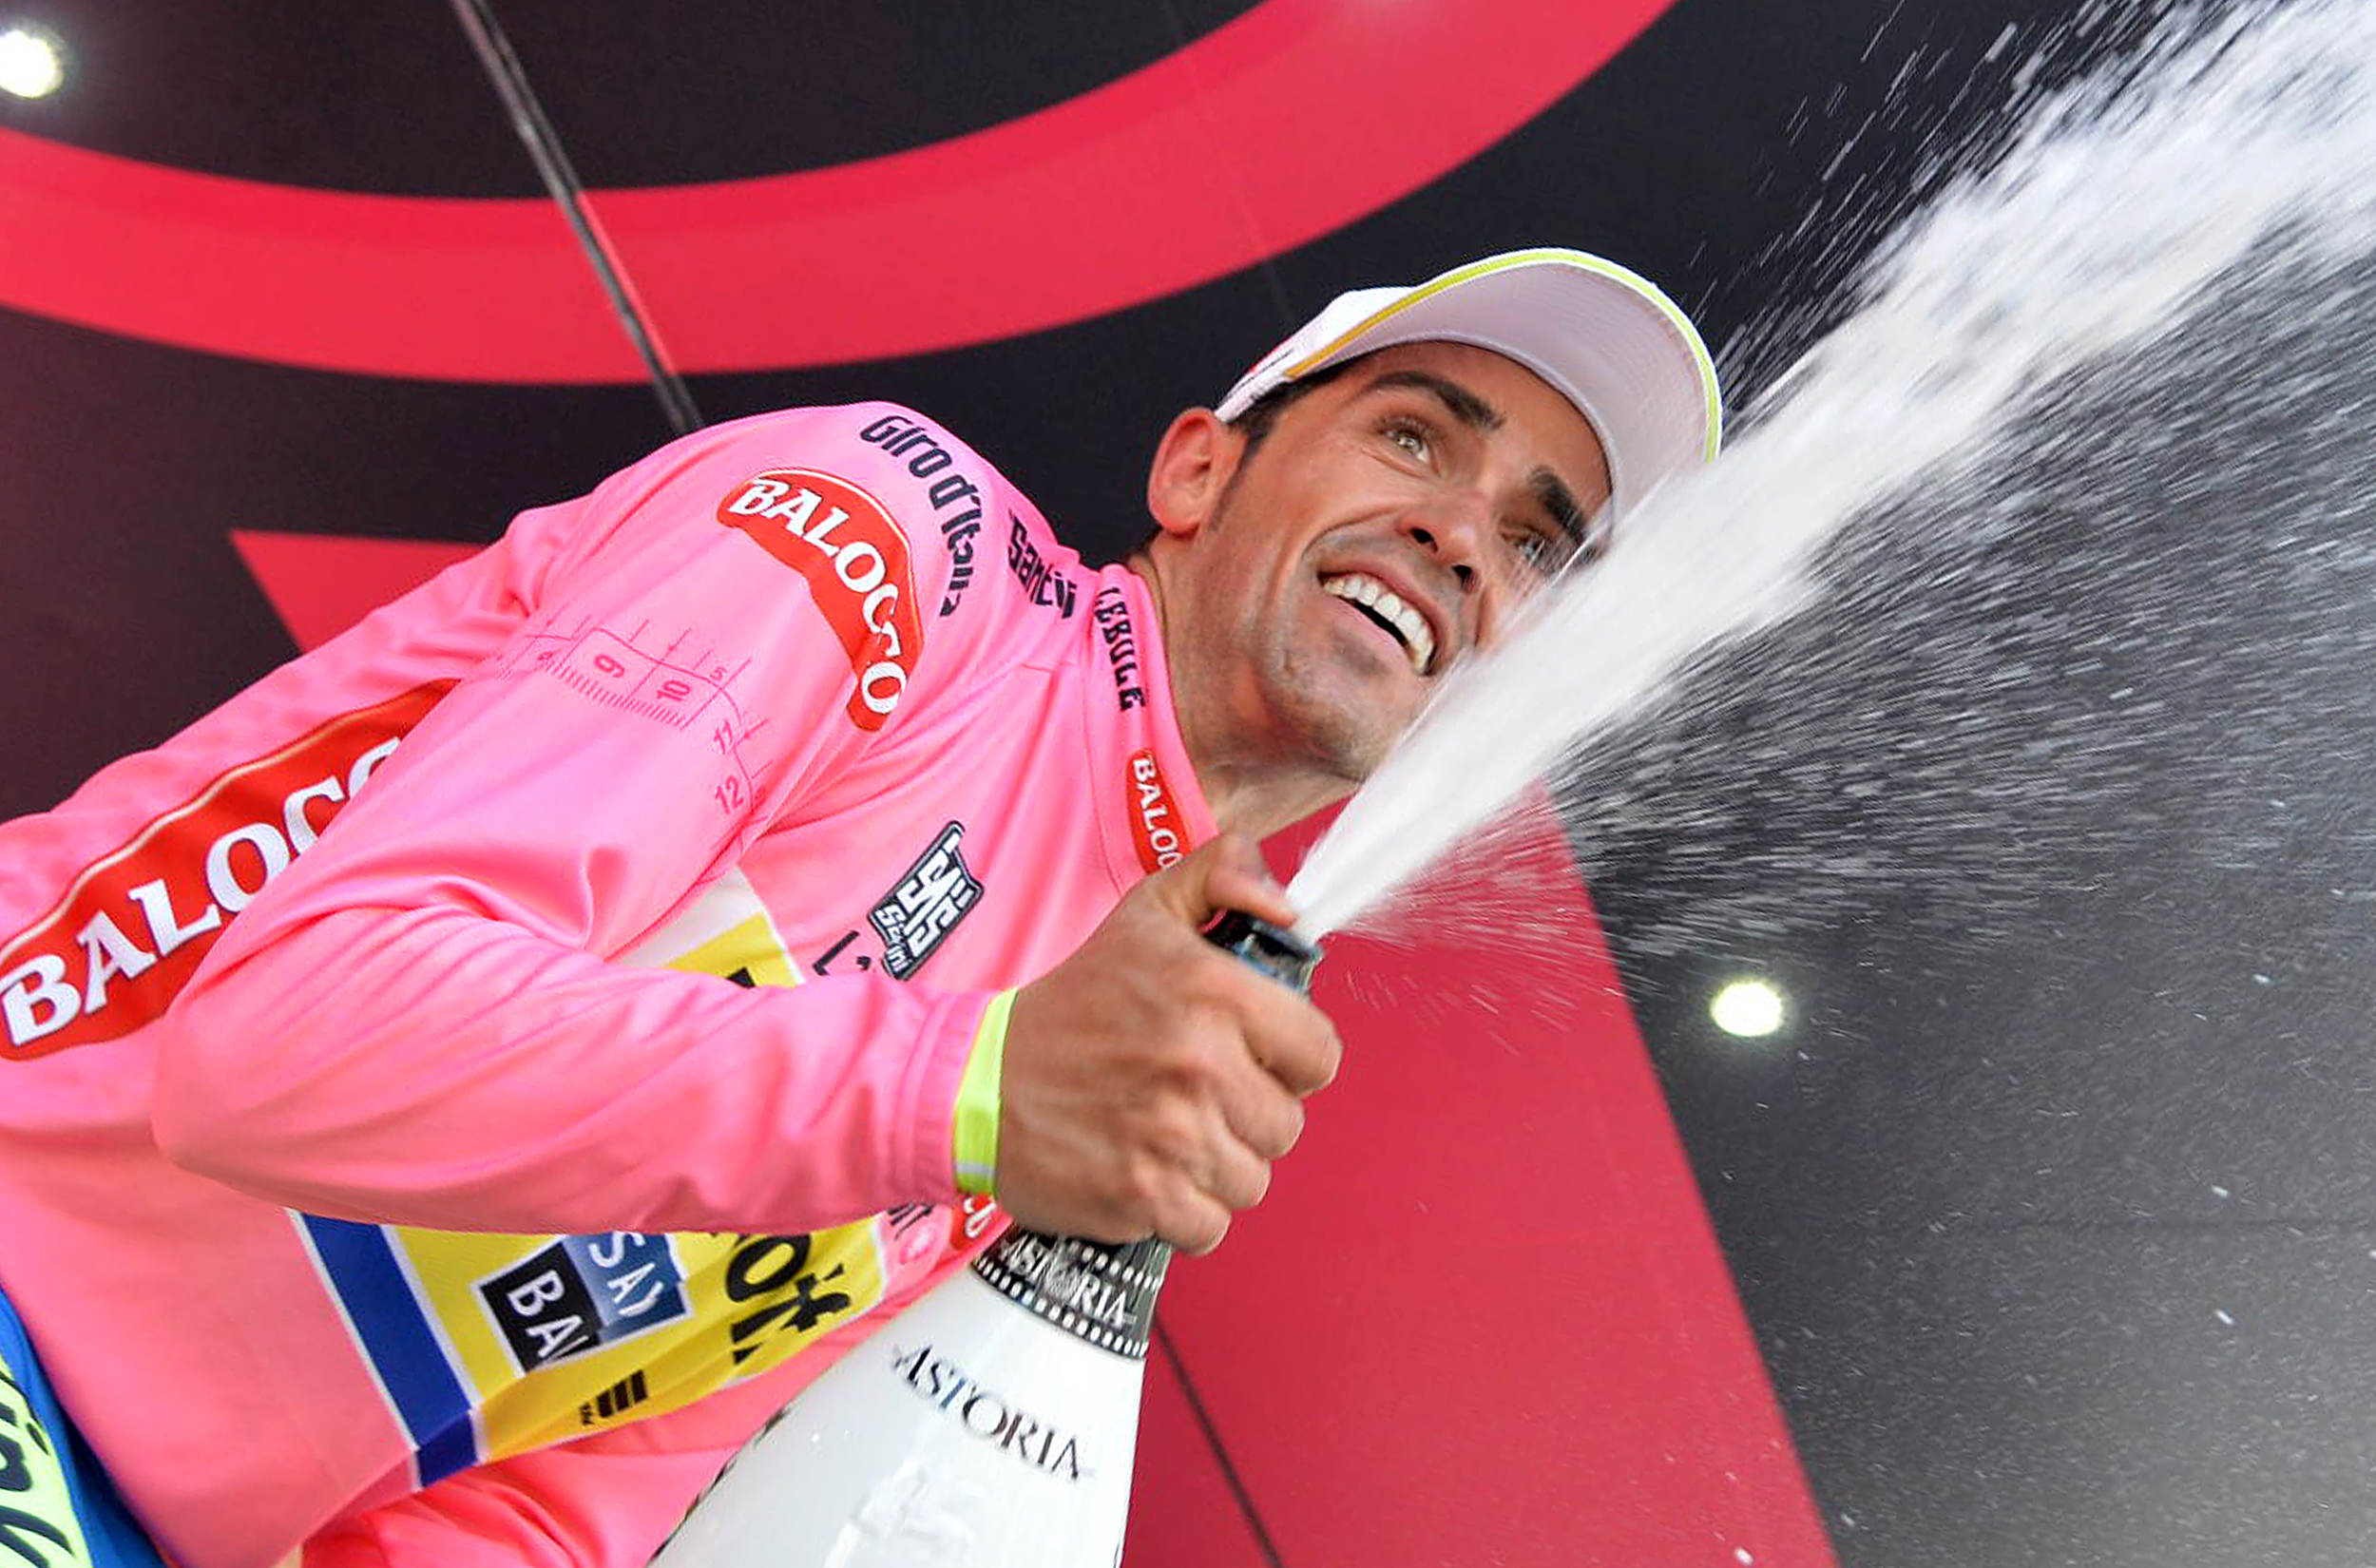 Spanish rider Alberto Contador of the Tinkoff-Saxo team celebrates on the podium the overall leader's pink jersey on the podium following the 16th stage of the 98th Giro d'Italia cycling tour, over 170km from Melide (CH) to Verbania, Italy, 28 May 2015. ANSA/LUCA ZENNARO